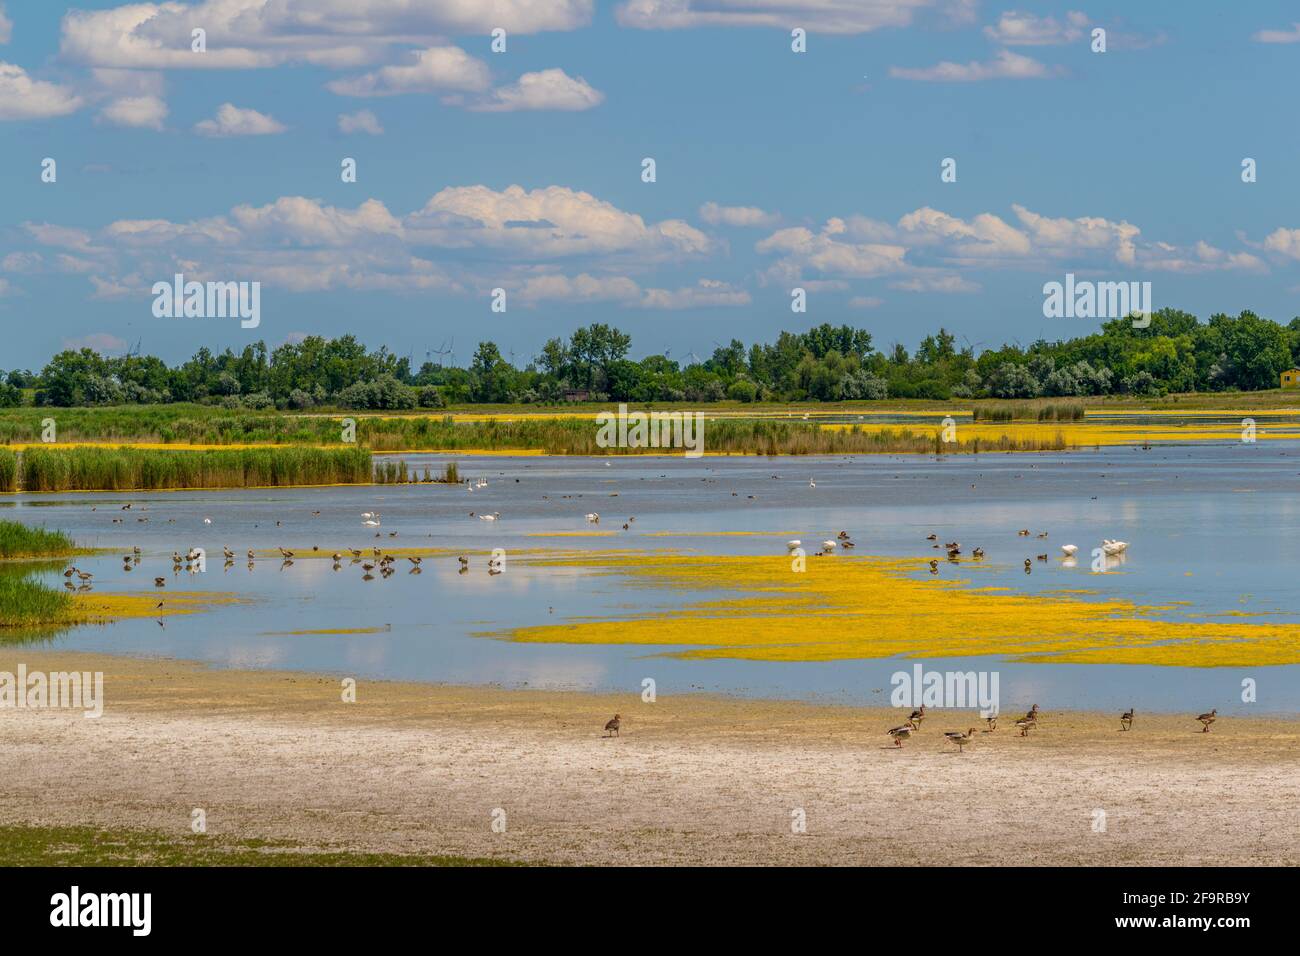 a saline lake situated next to the neusiedlersee and Ilmitz village in Burgenland, Austria. Stock Photo